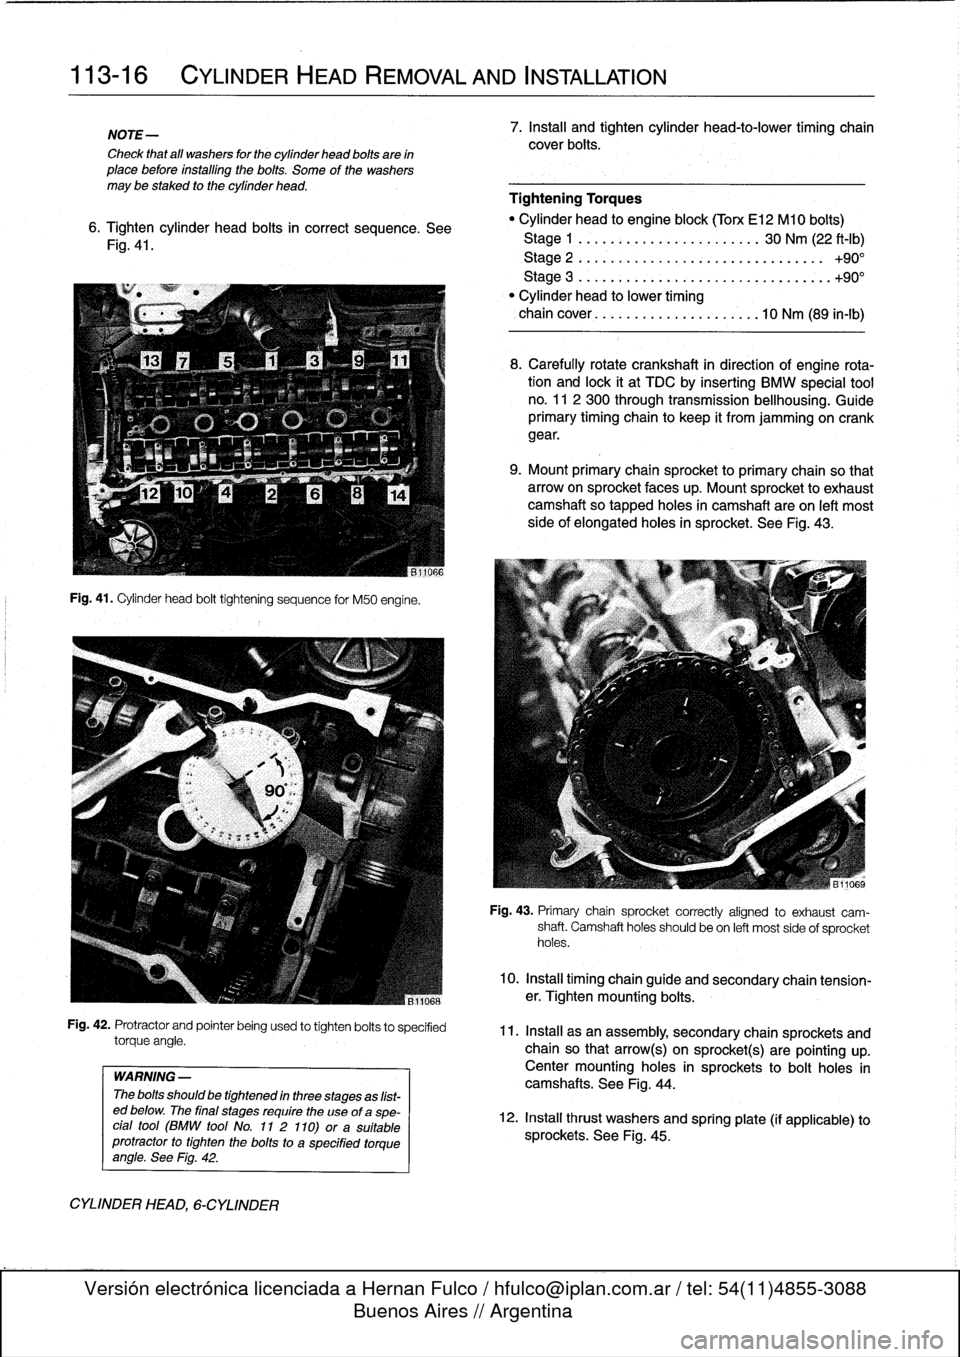 BMW 325i 1997 E36 User Guide 
113-16

	

CYLINDER
HEAD
REMOVAL
AND
INSTALLATION

NOTE-

Check
that
all
washers
for
the
cylinder
head
bolts
are
in
place
before
installlng
the
bolts
.
Some
of
the
washers
may
be
staked
to
the
cylind